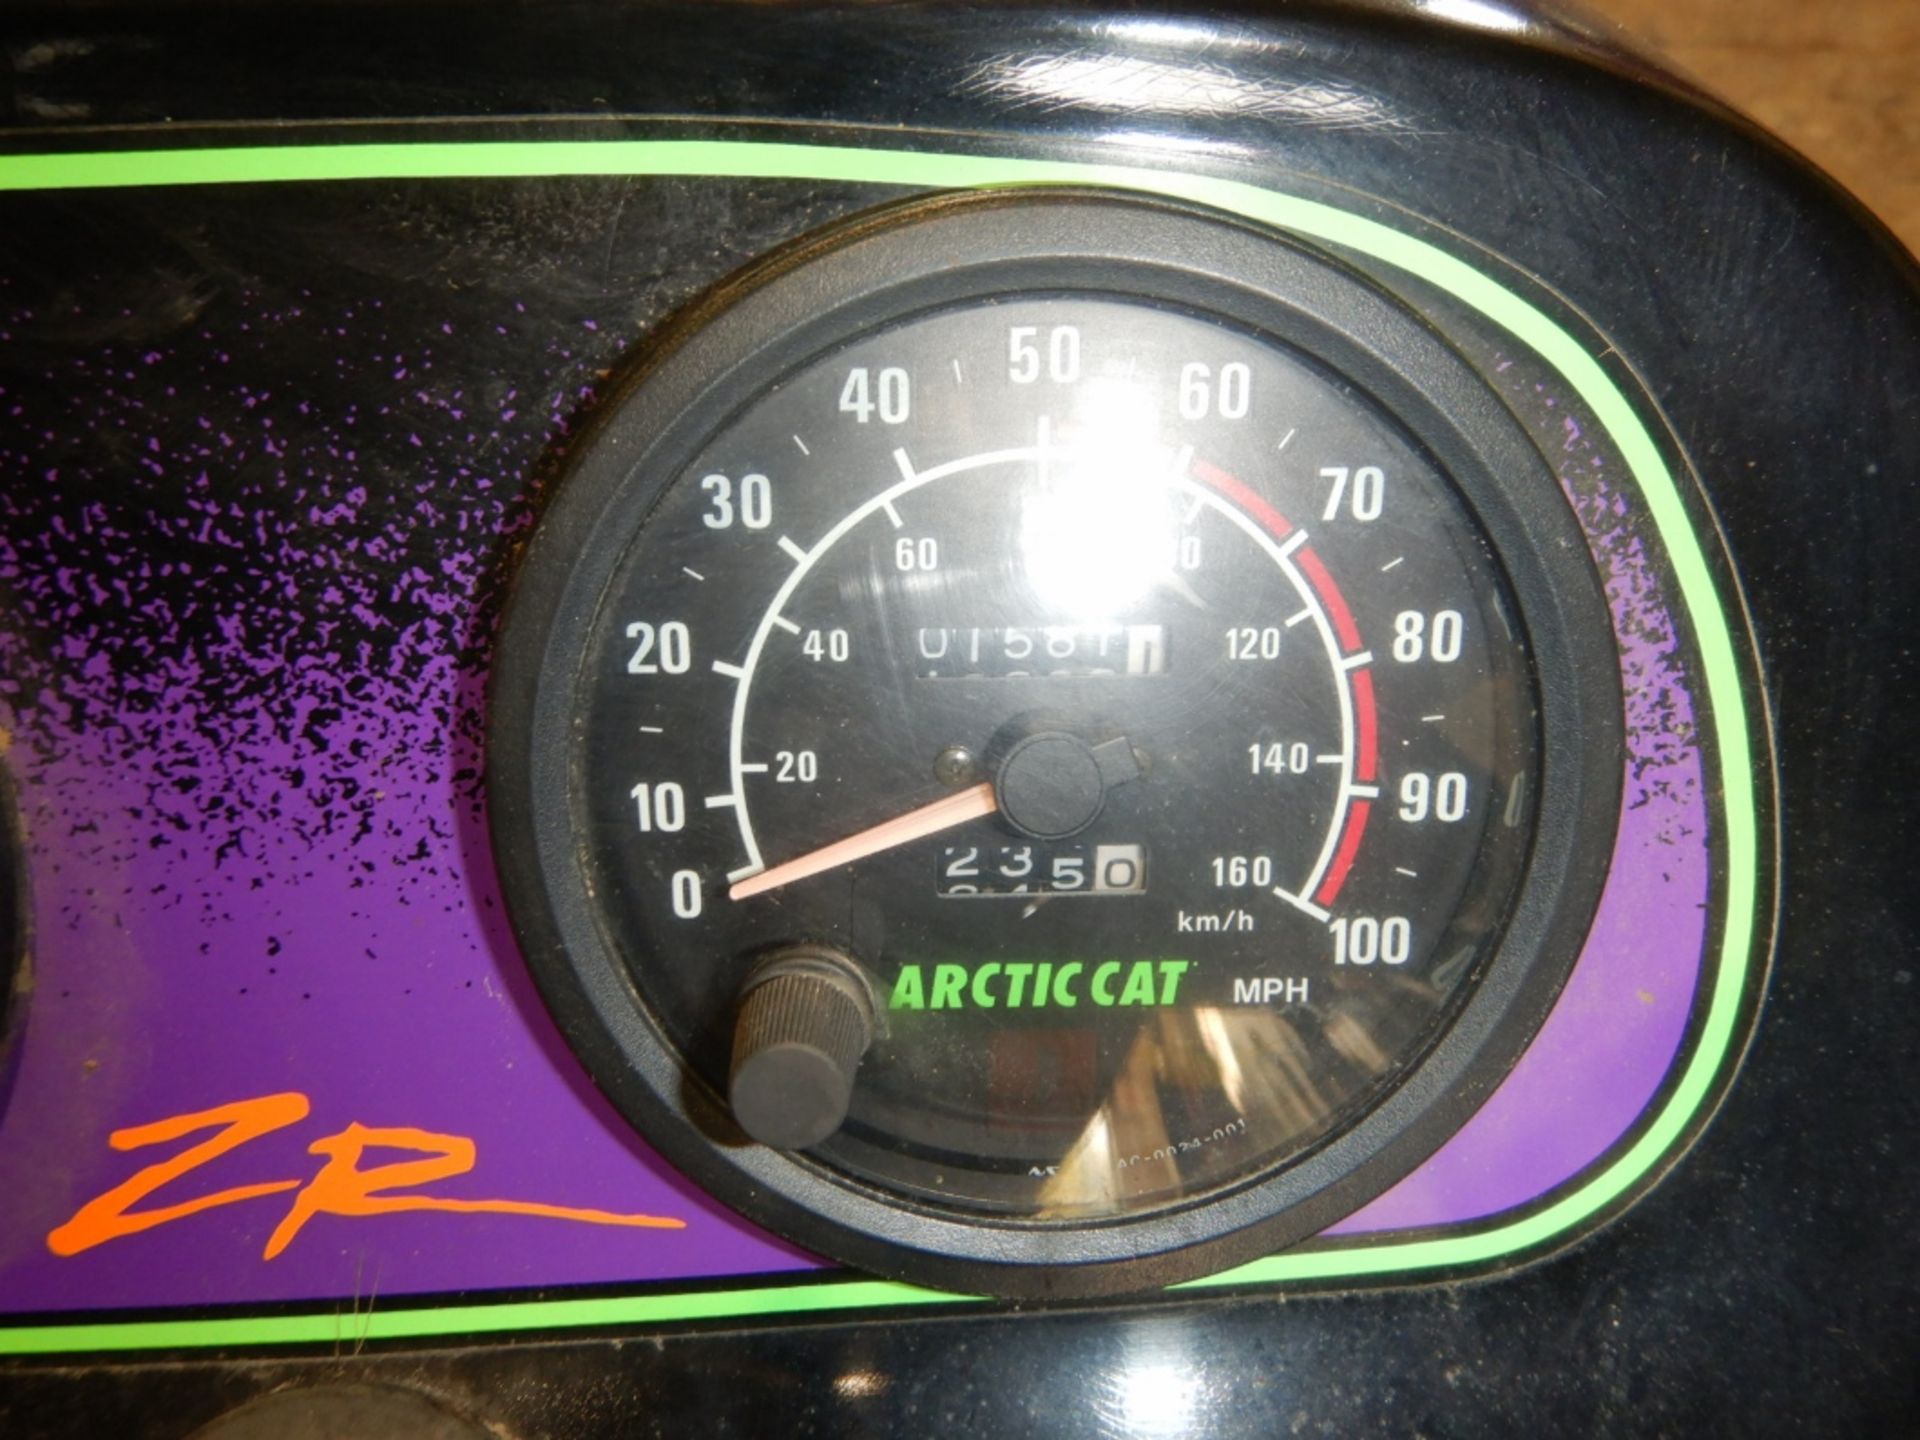 1994 ARTIC CAT ZR580 SNOWMOBILE, 1581 MILES SHOWING - Image 5 of 5